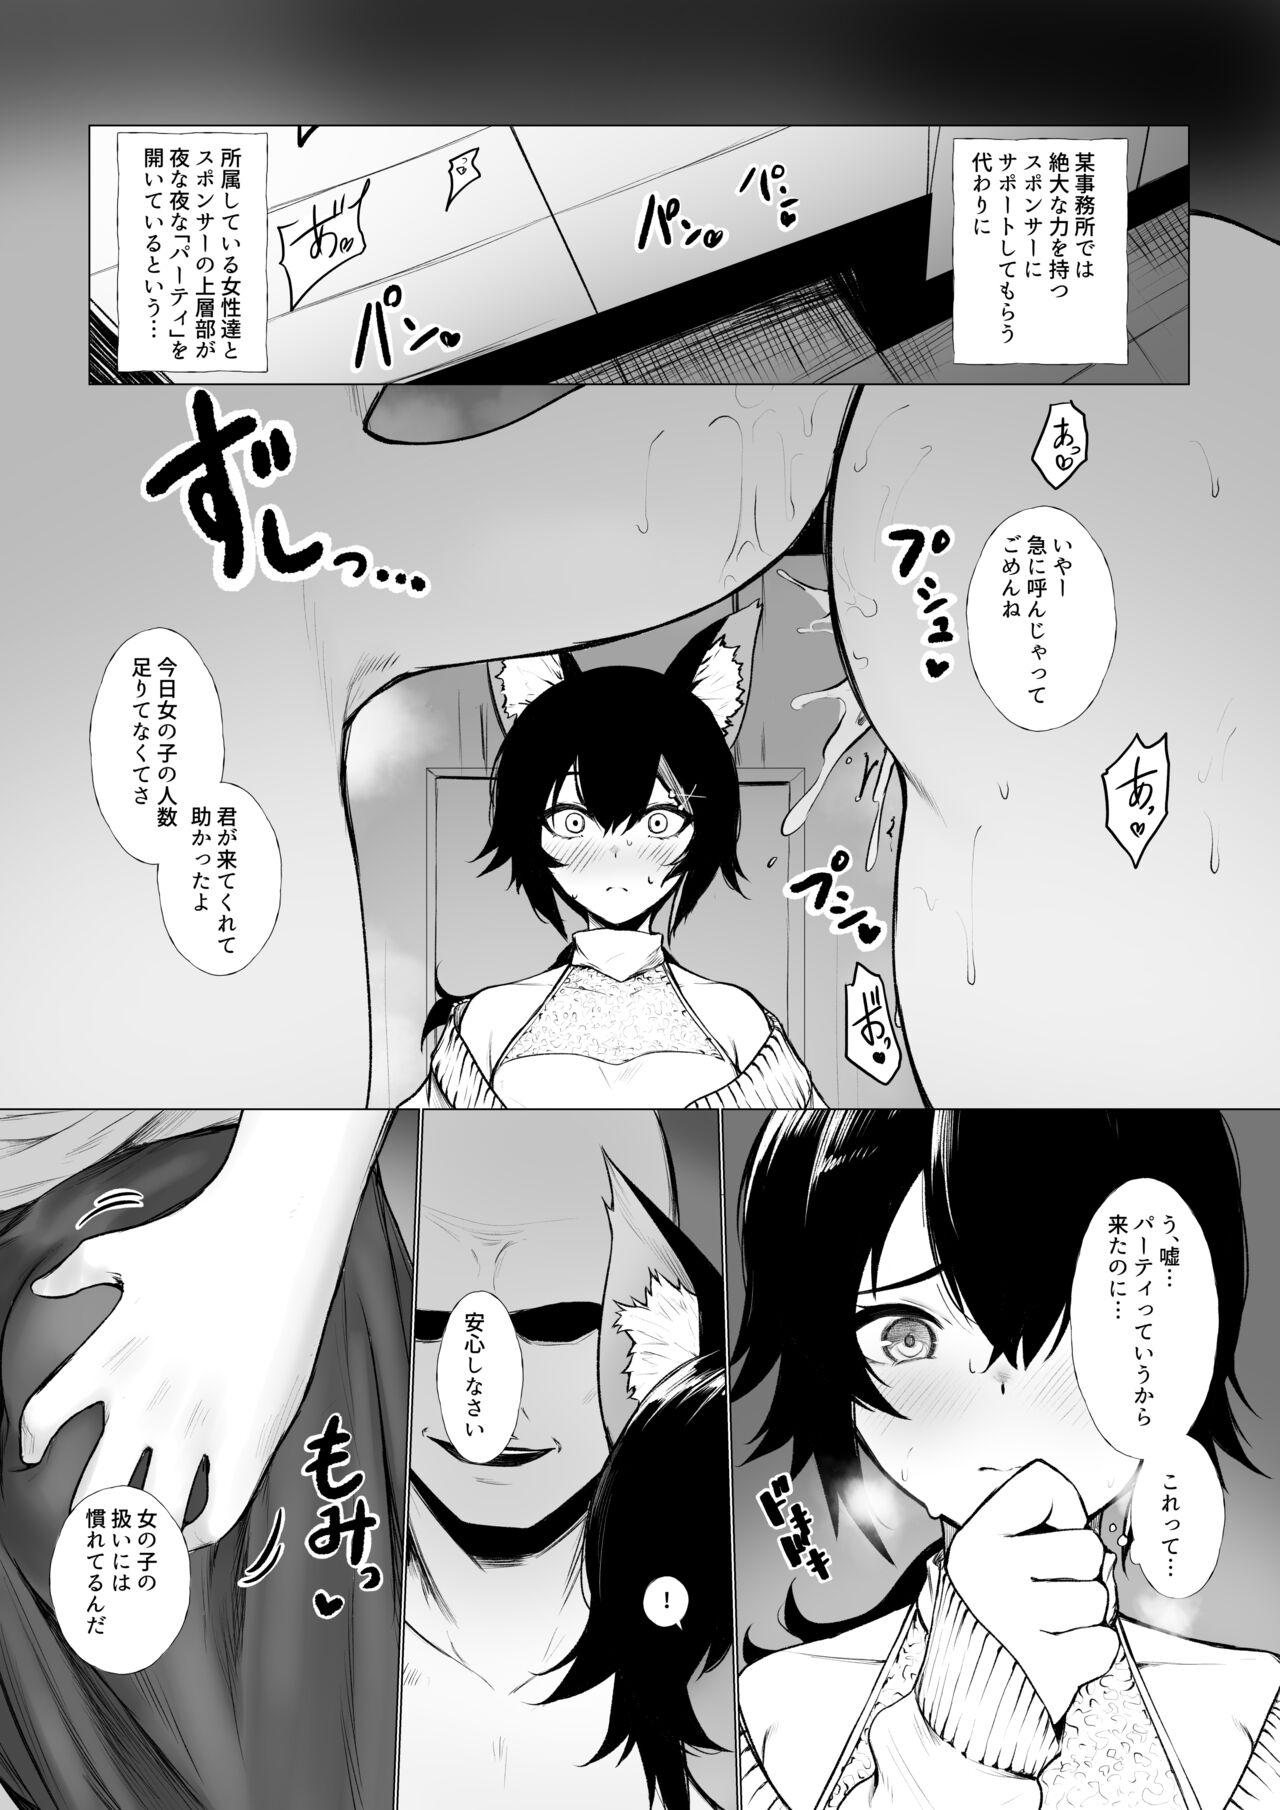 Peludo 女にされちゃうmo - Hololive Longhair - Page 2